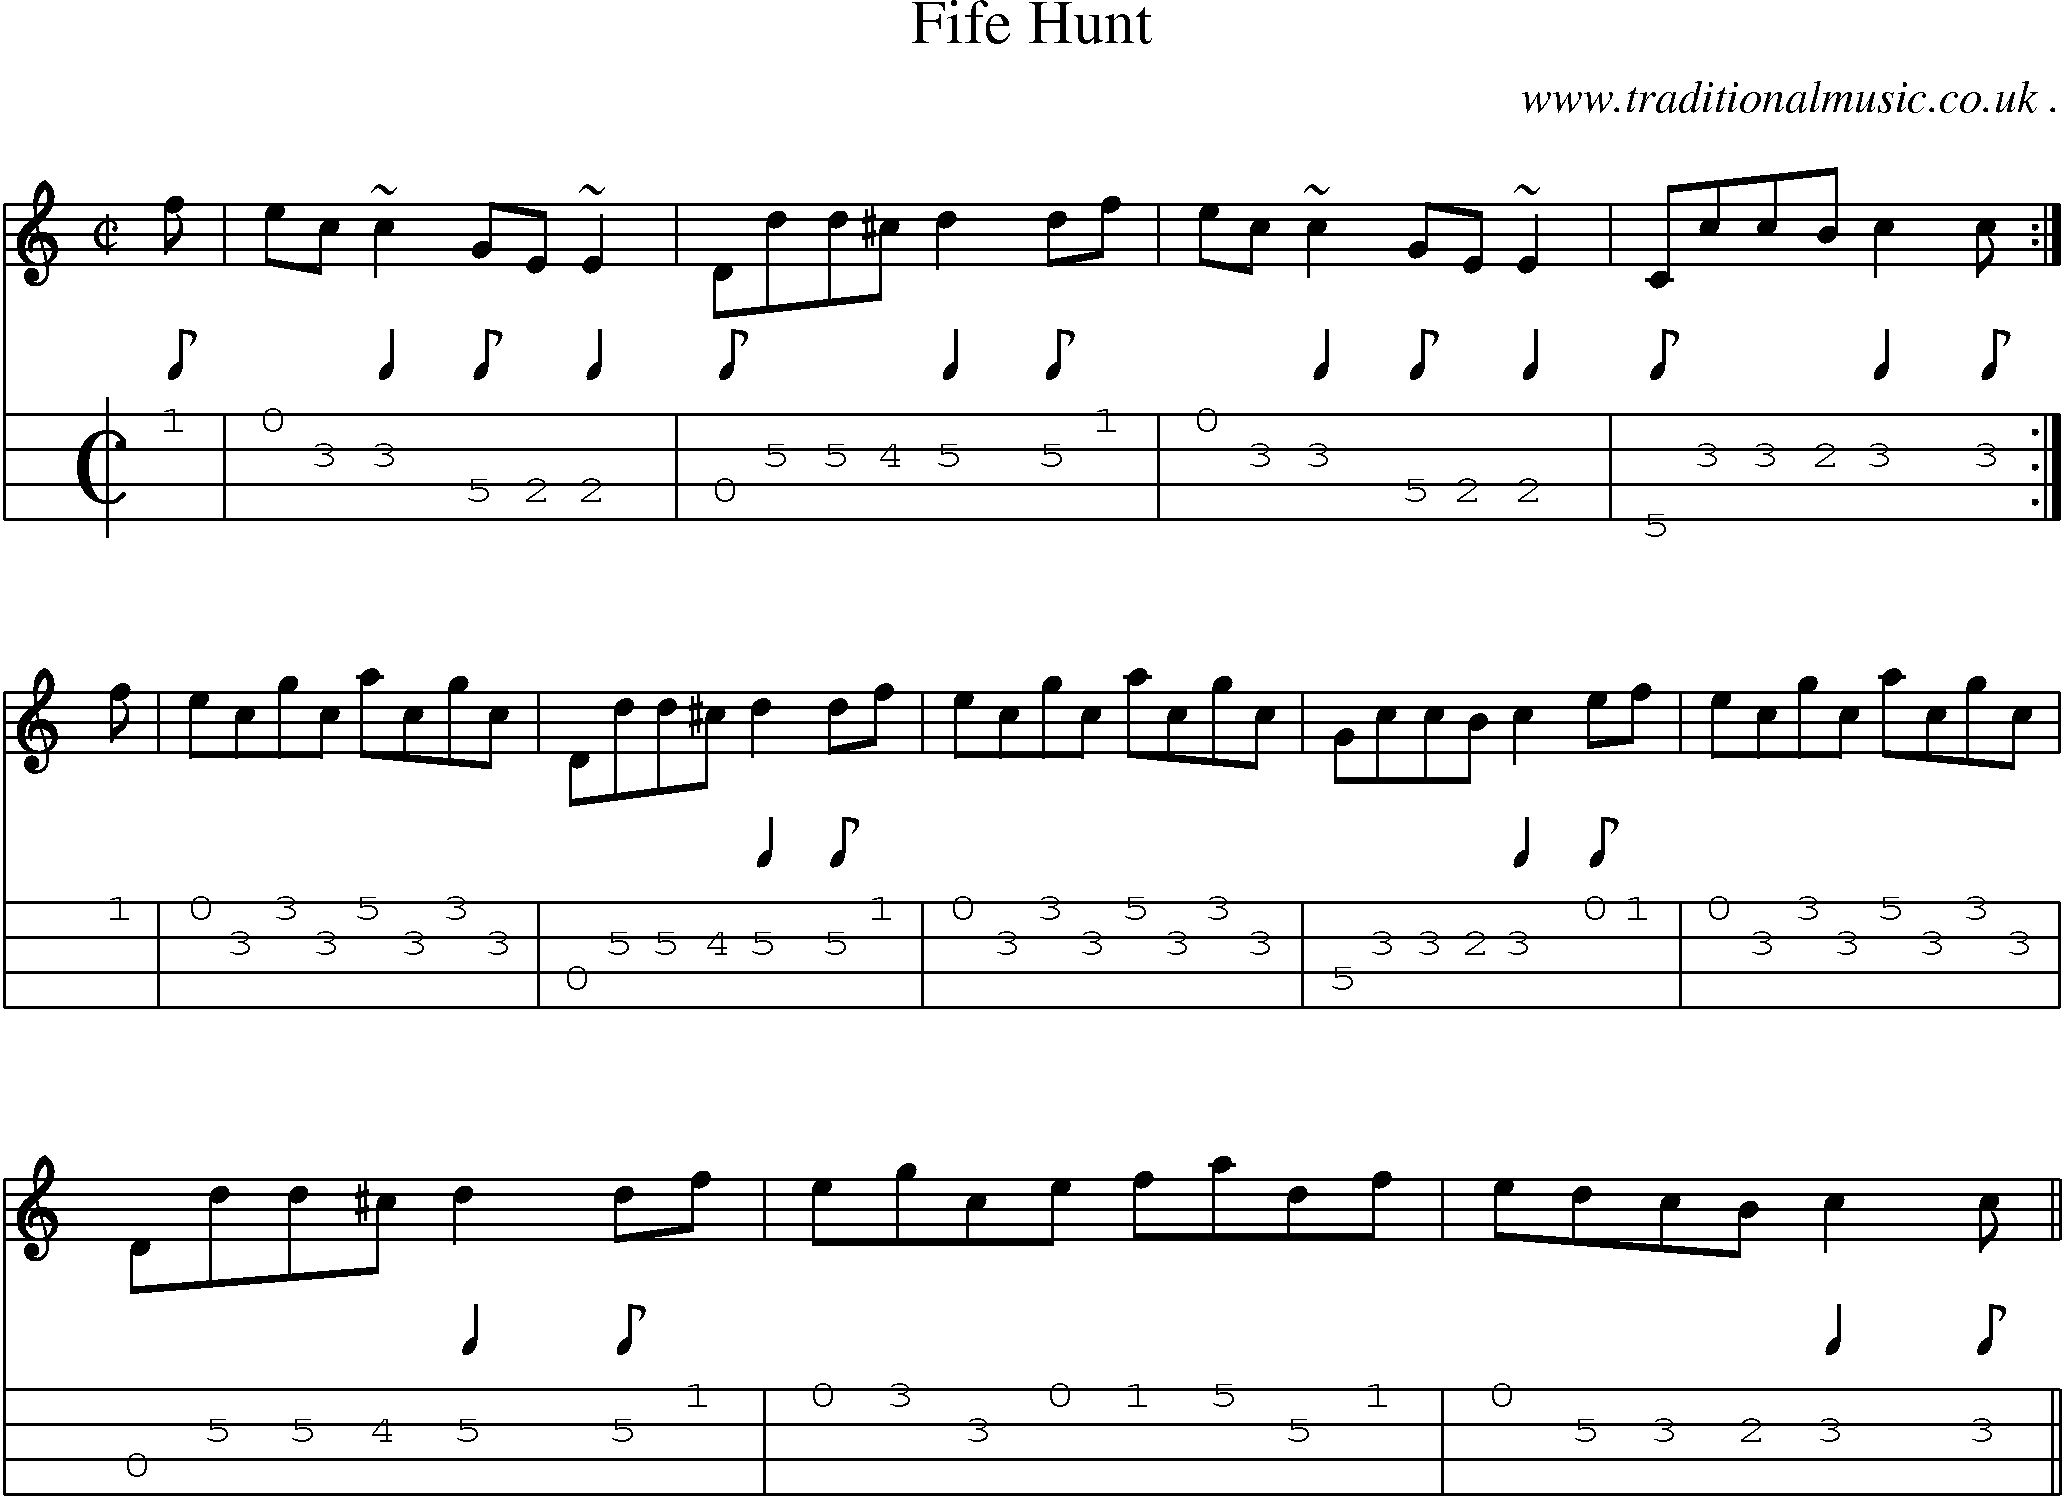 Sheet-music  score, Chords and Mandolin Tabs for Fife Hunt